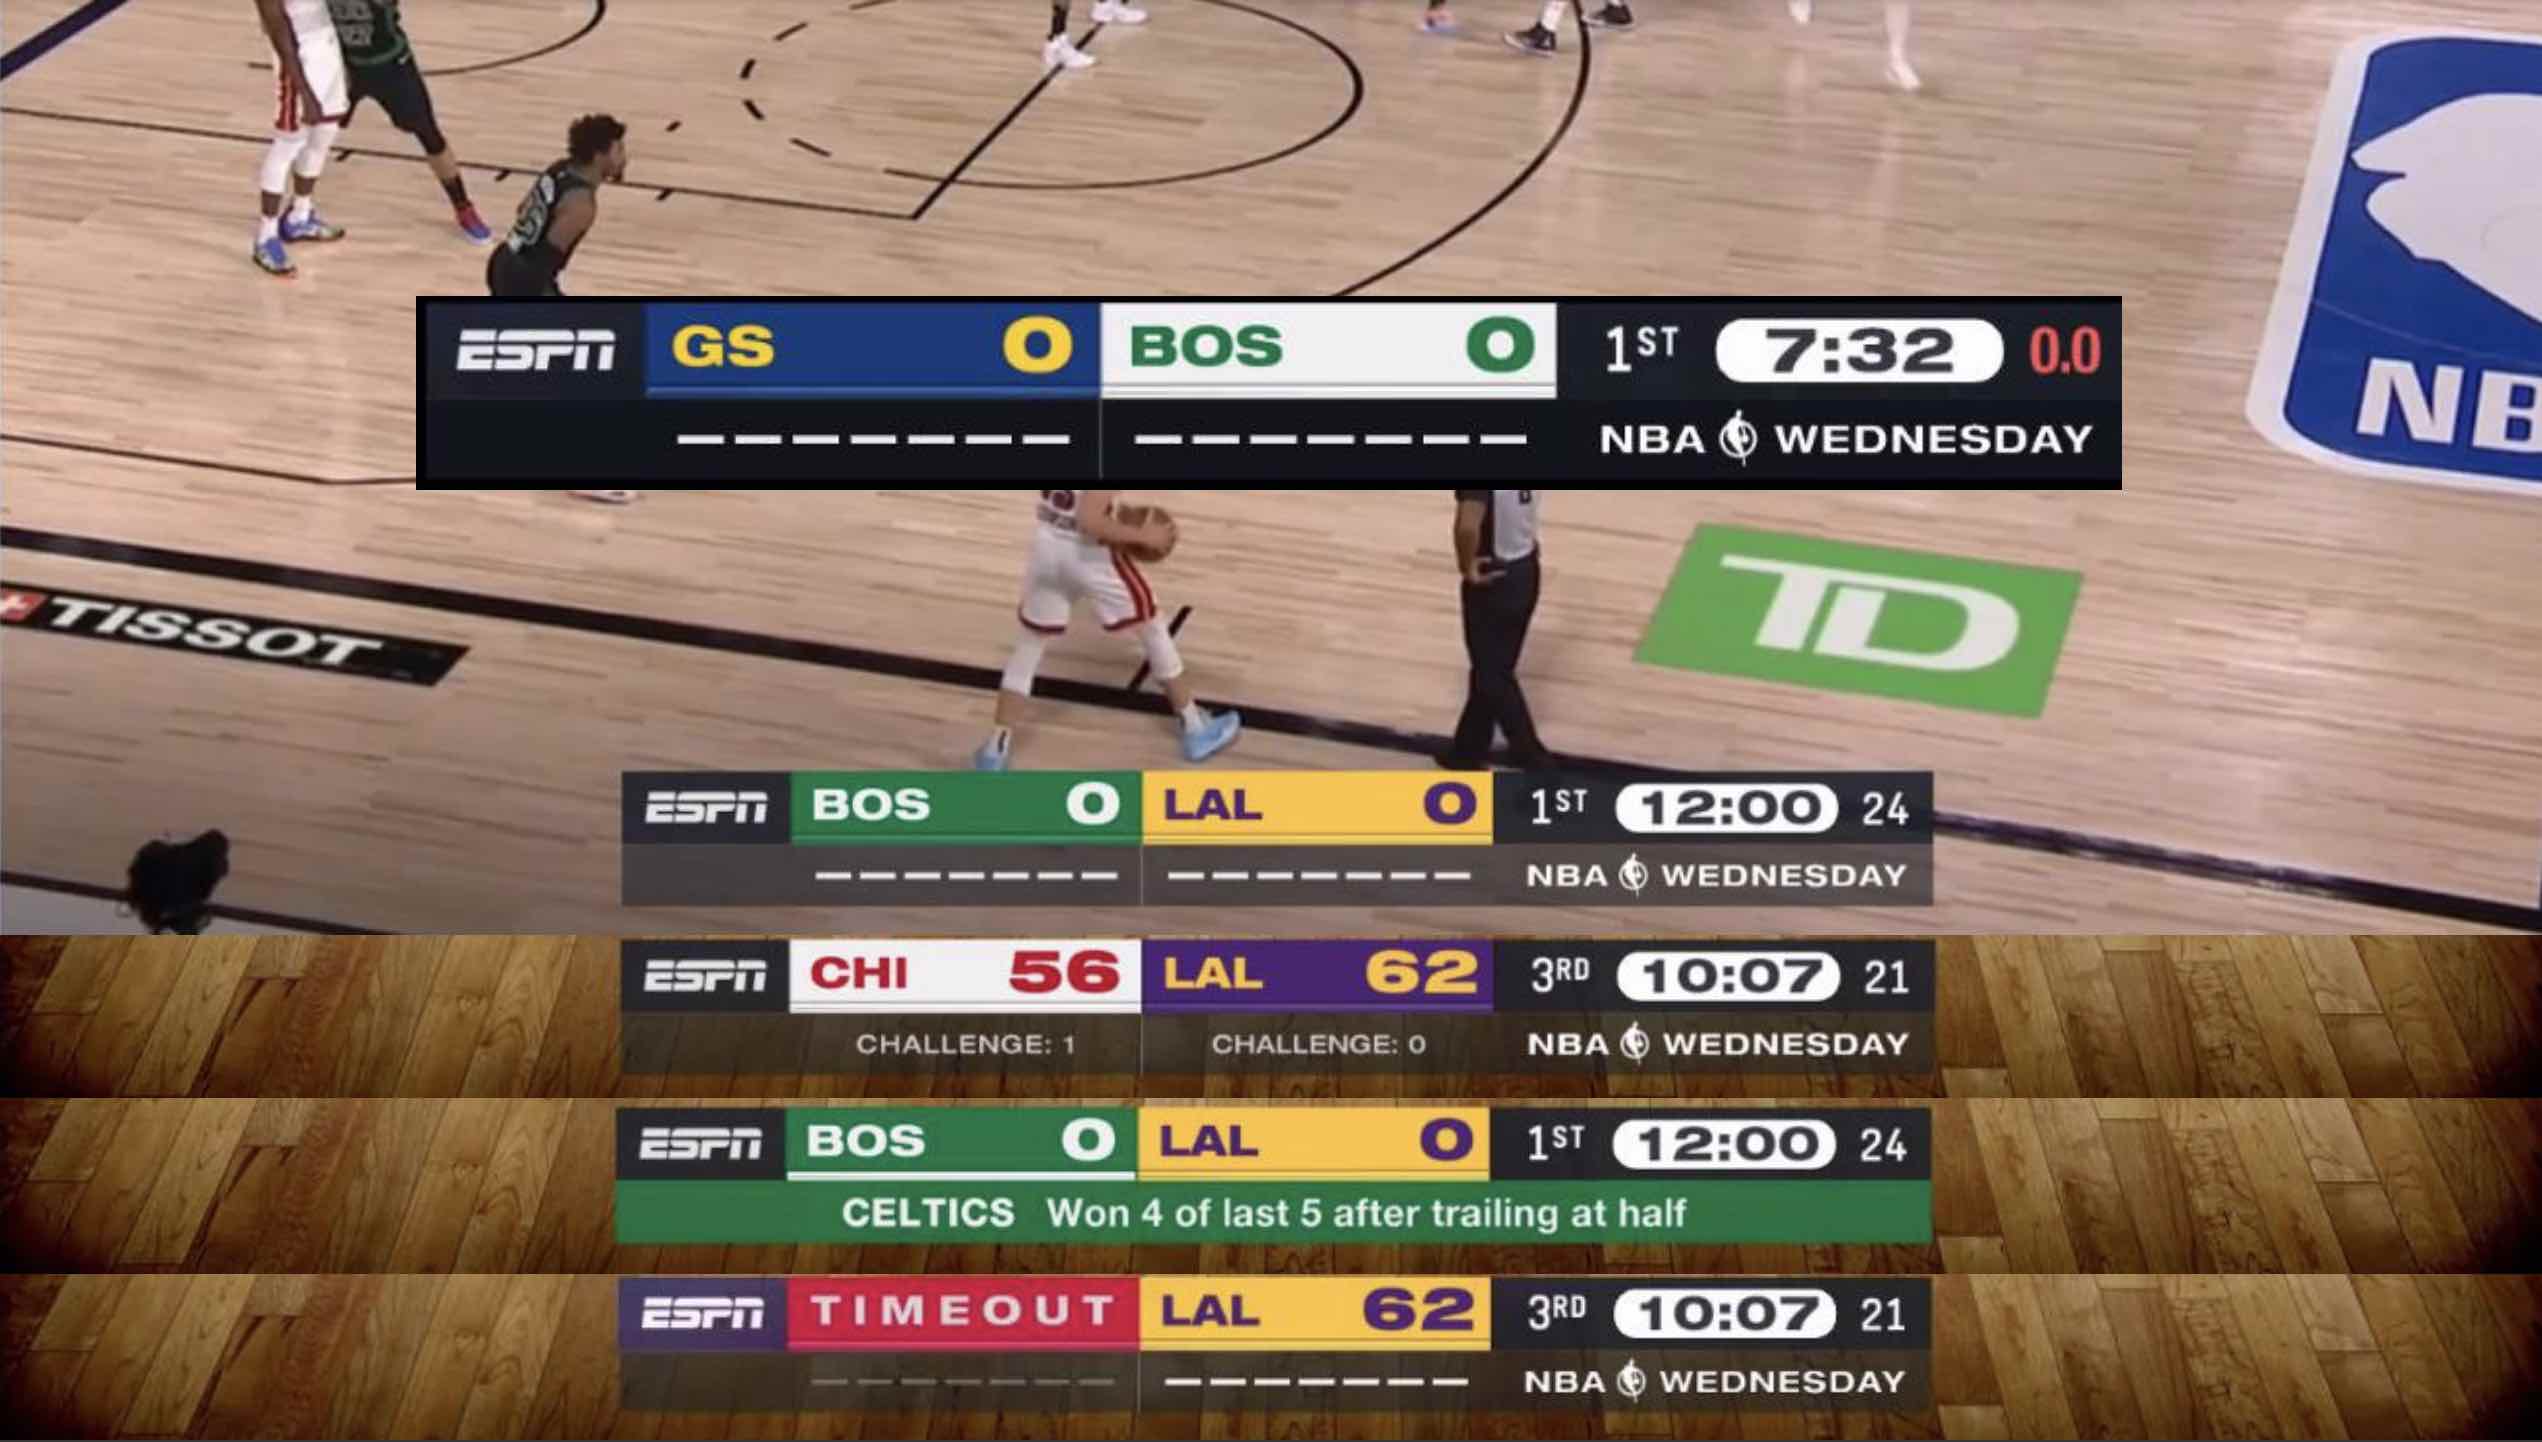 NBA Tipoff 2022 ESPN Enters Upcoming Season With New Graphics Package, Test of Sideline Pylon Cams